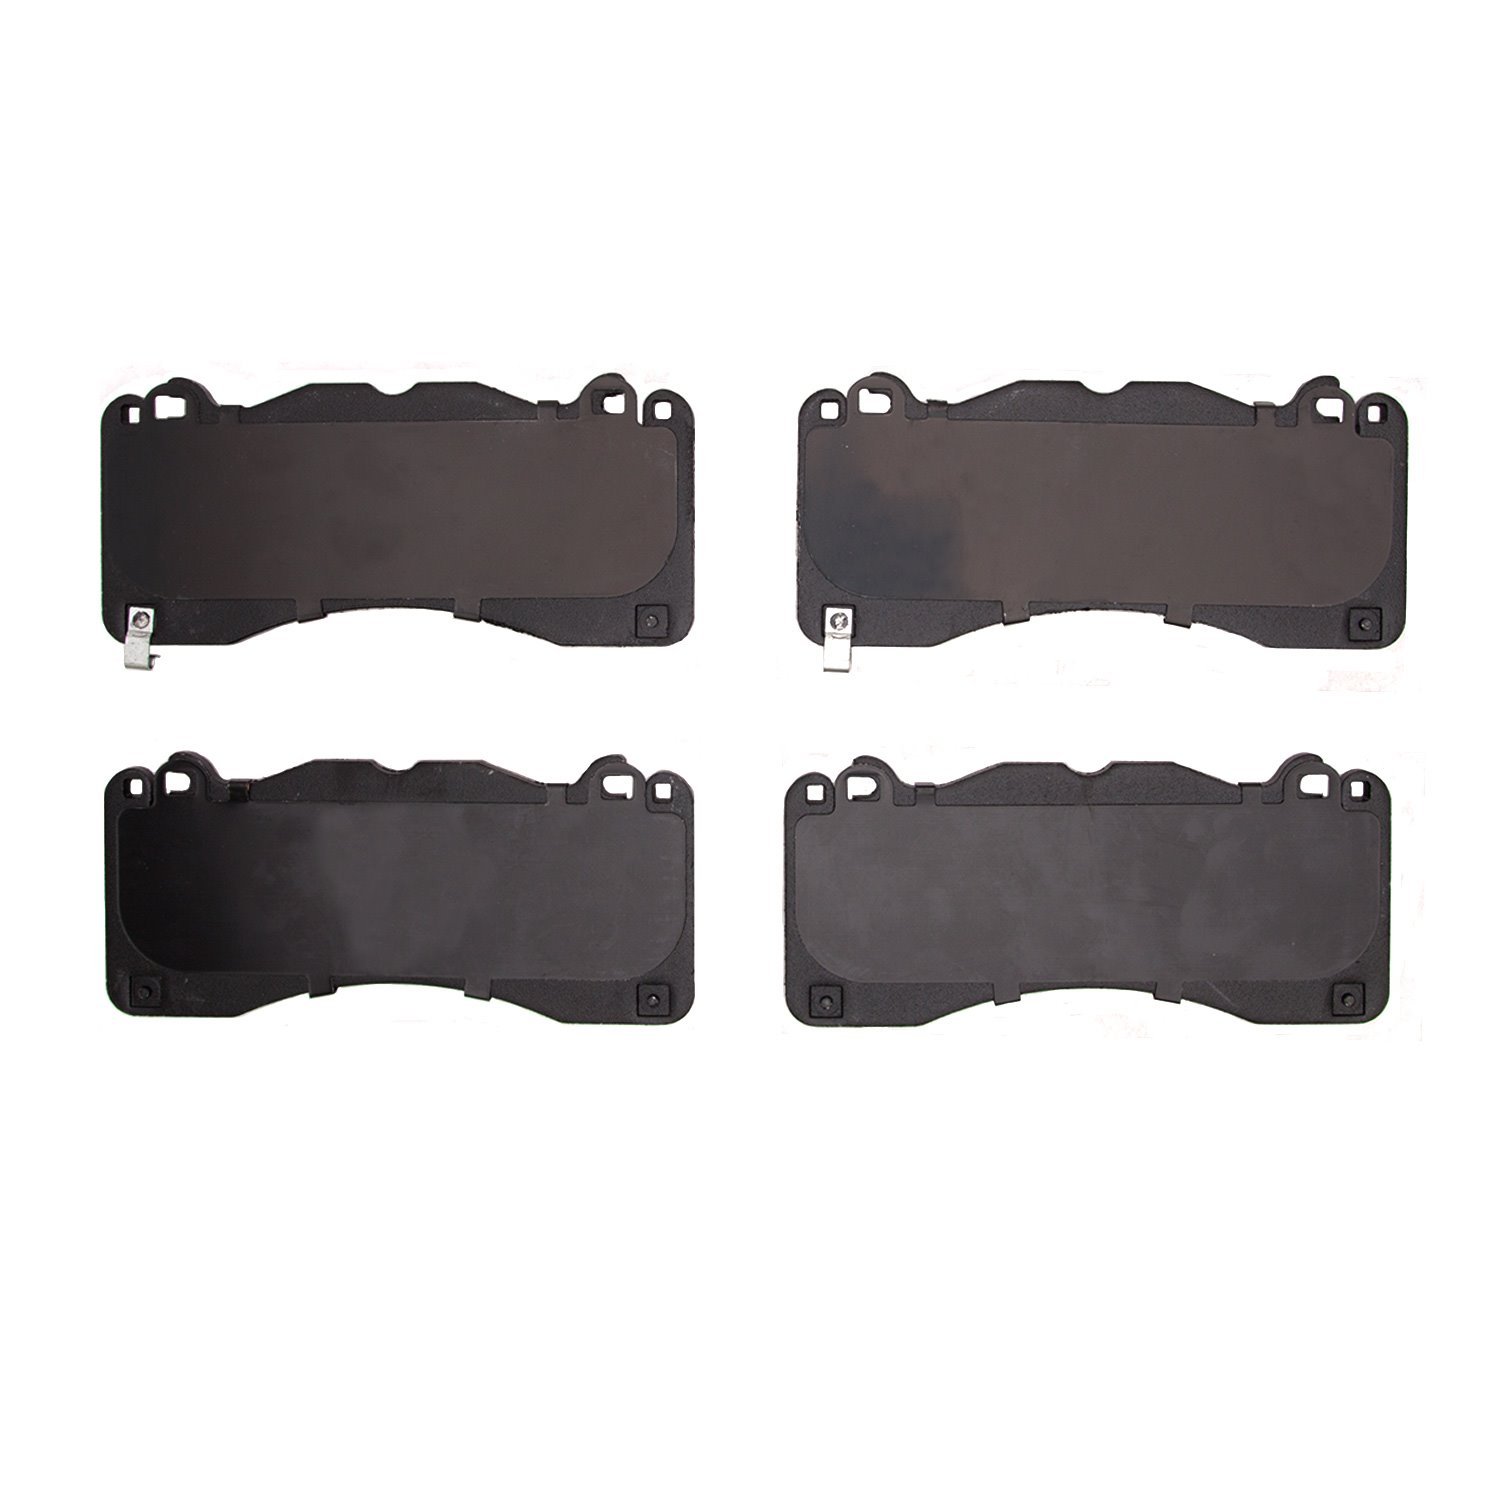 1552-1792-00 5000 Advanced Low-Metallic Brake Pads, Fits Select Ford/Lincoln/Mercury/Mazda, Position: Front